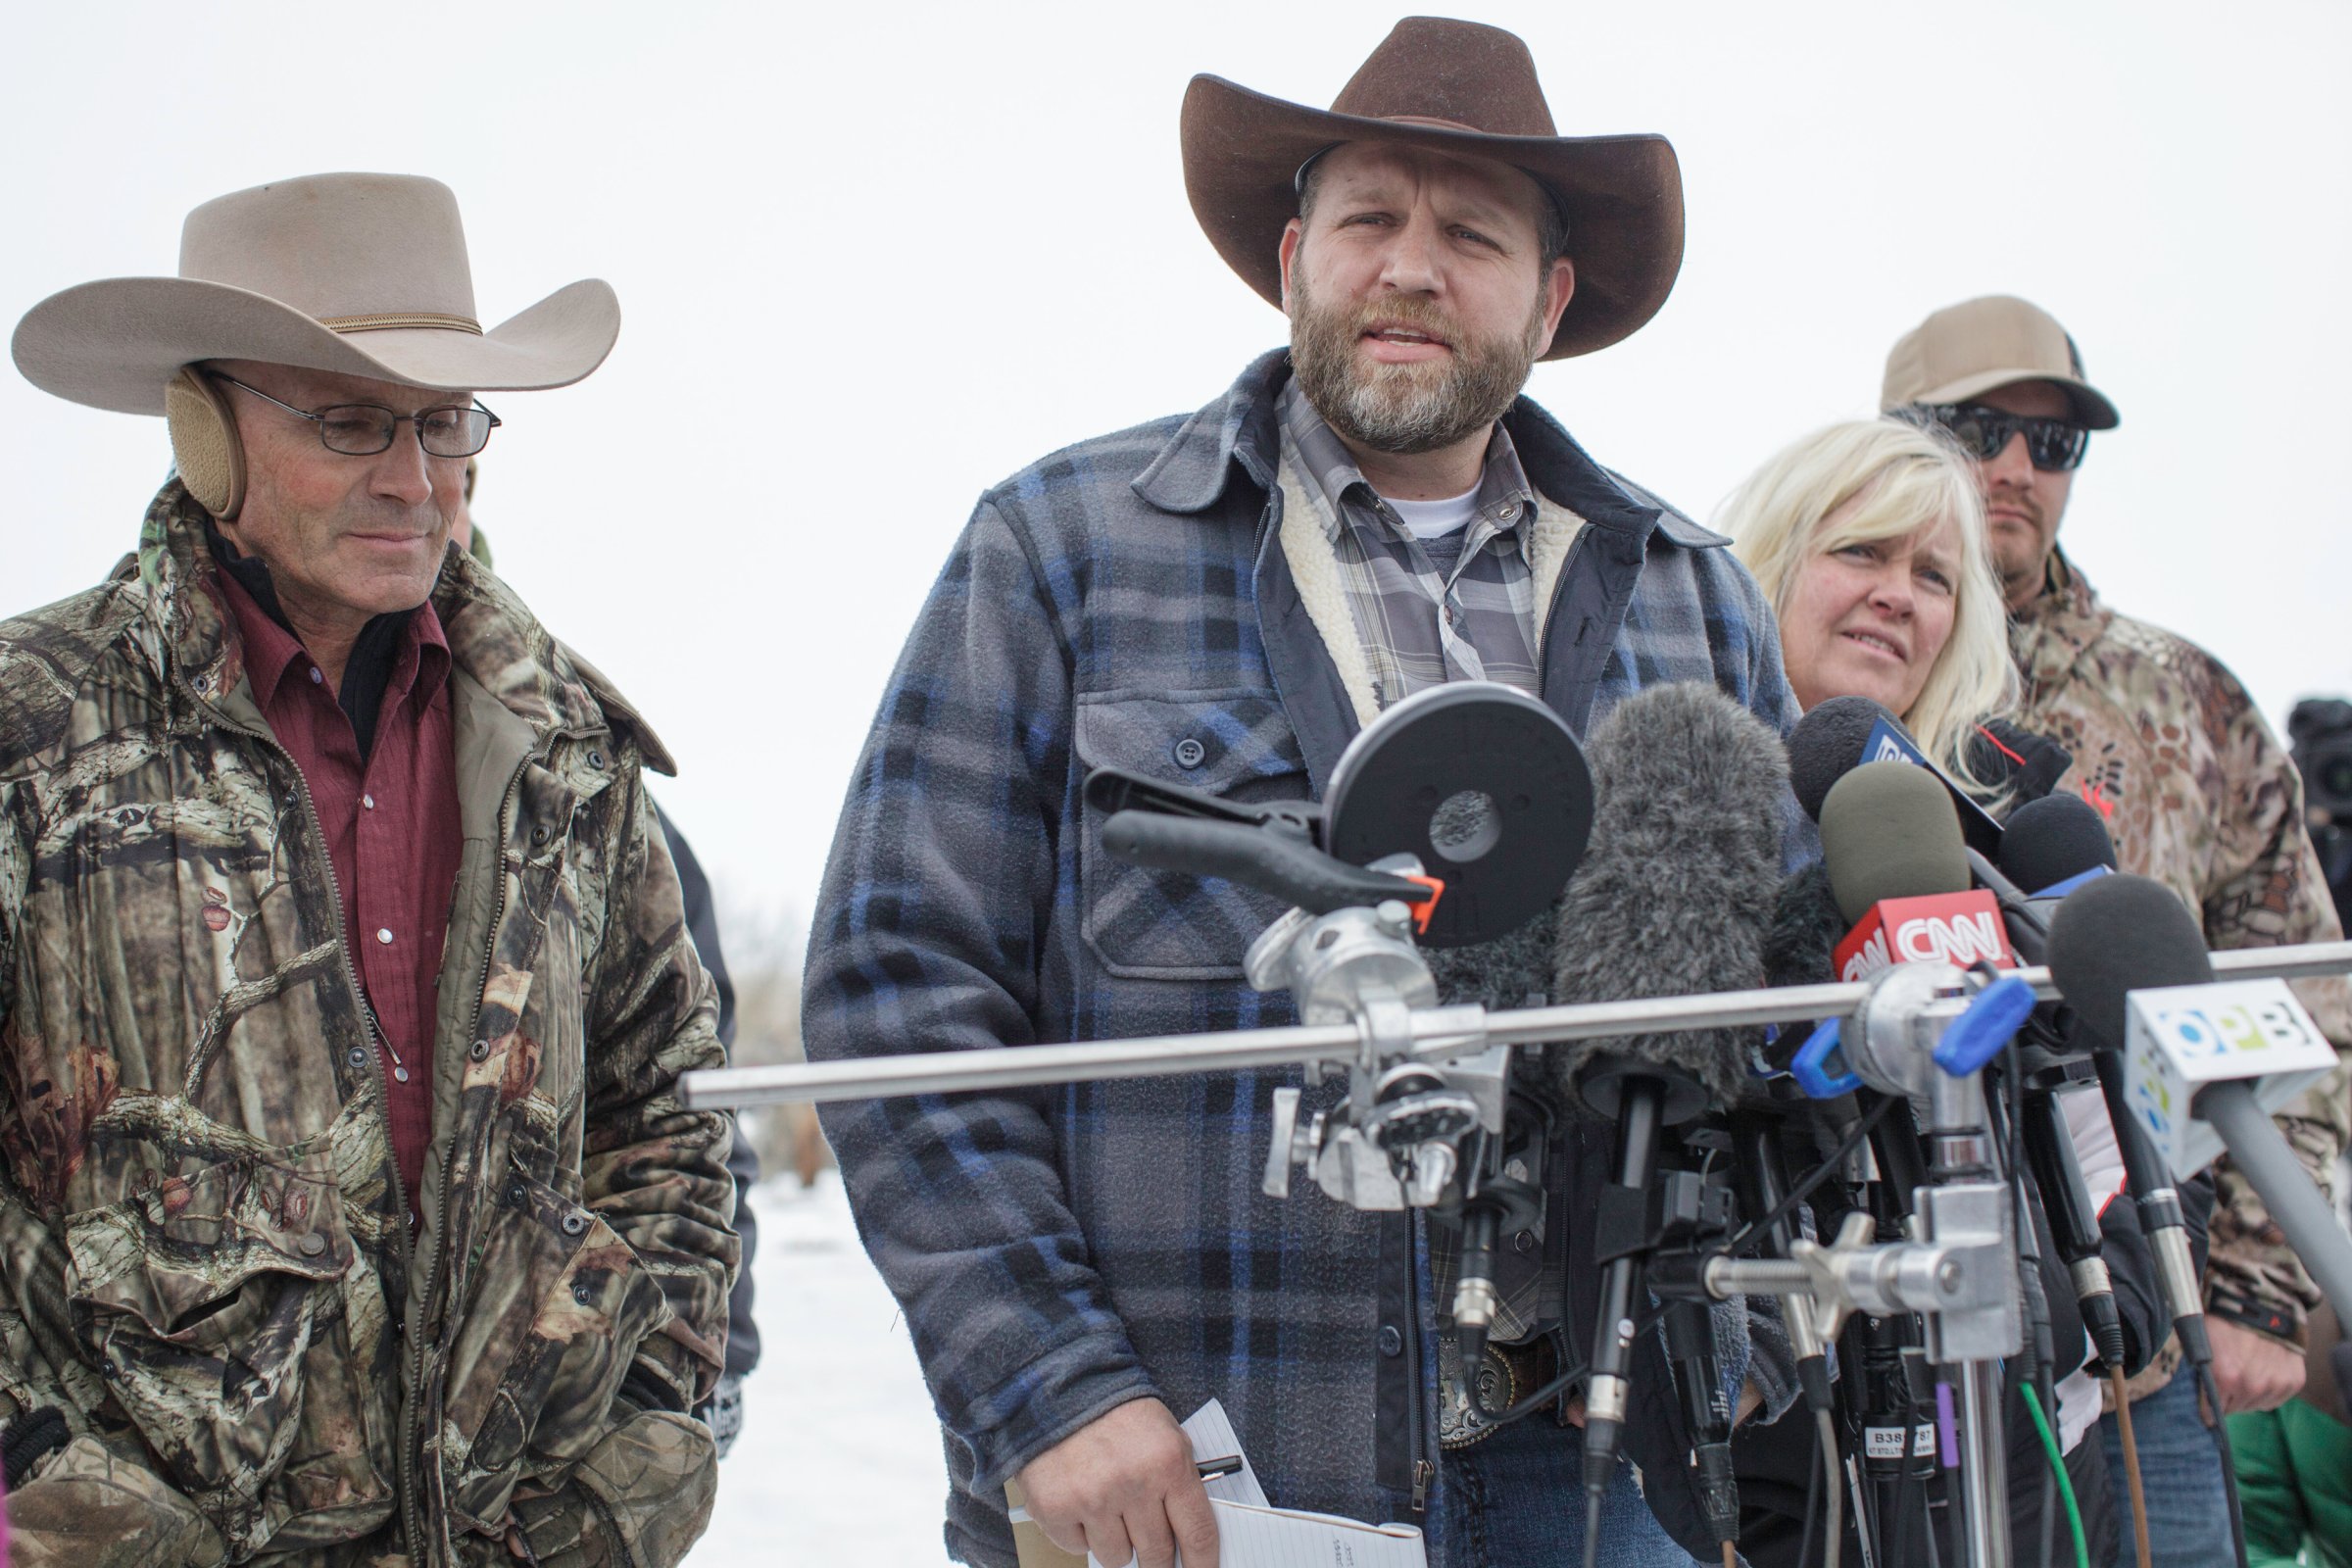 Ammon Bundy (C), leader of an armed anti-government militia, makes a statement at a news conference at the Malheur National Wildlife Refuge Headquarters near Burns, Ore., on Jan. 5, 2016.